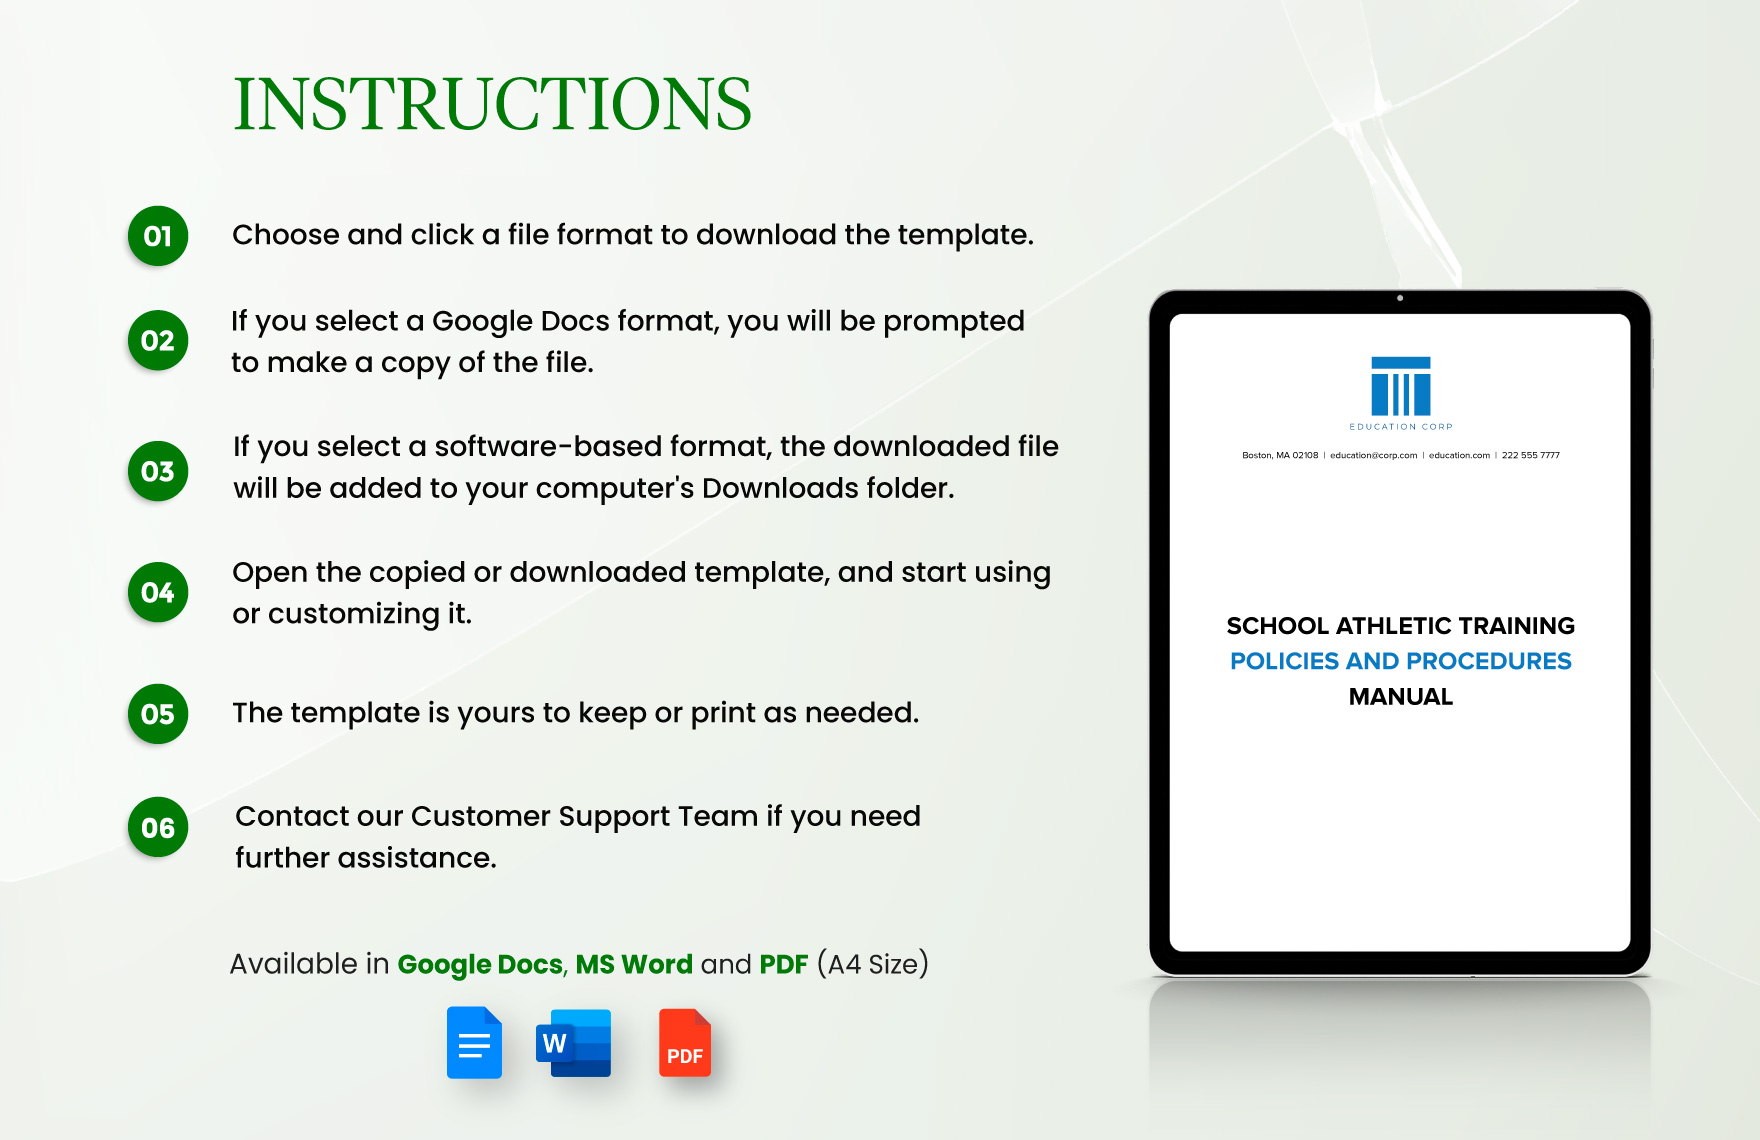 School Athletic Training Policies and Procedures Manual Template